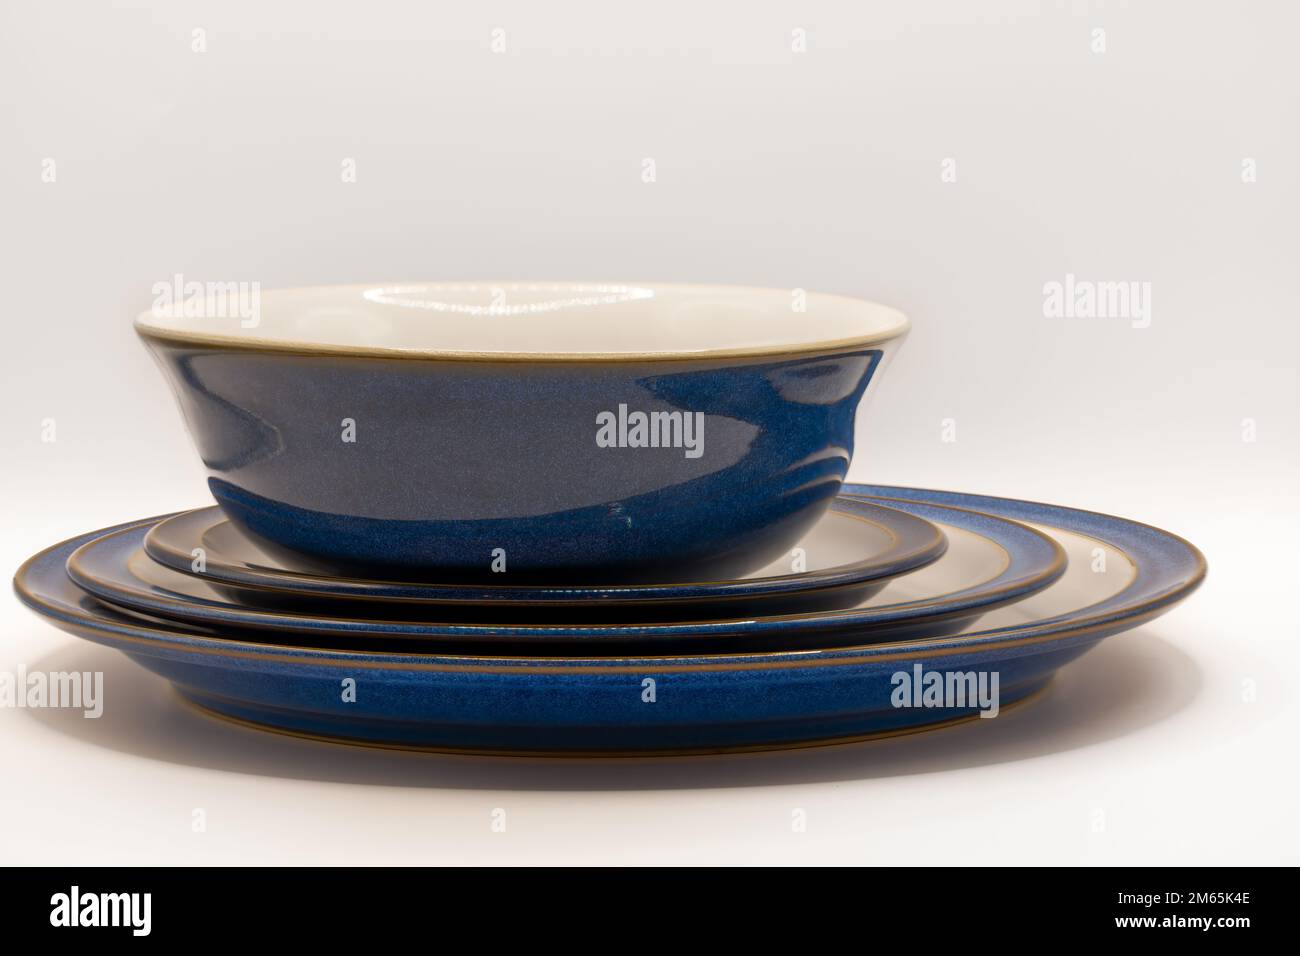 a centred bowl and three sizes of crockery plates in white with blue rims and edges and a gold trim Stock Photo